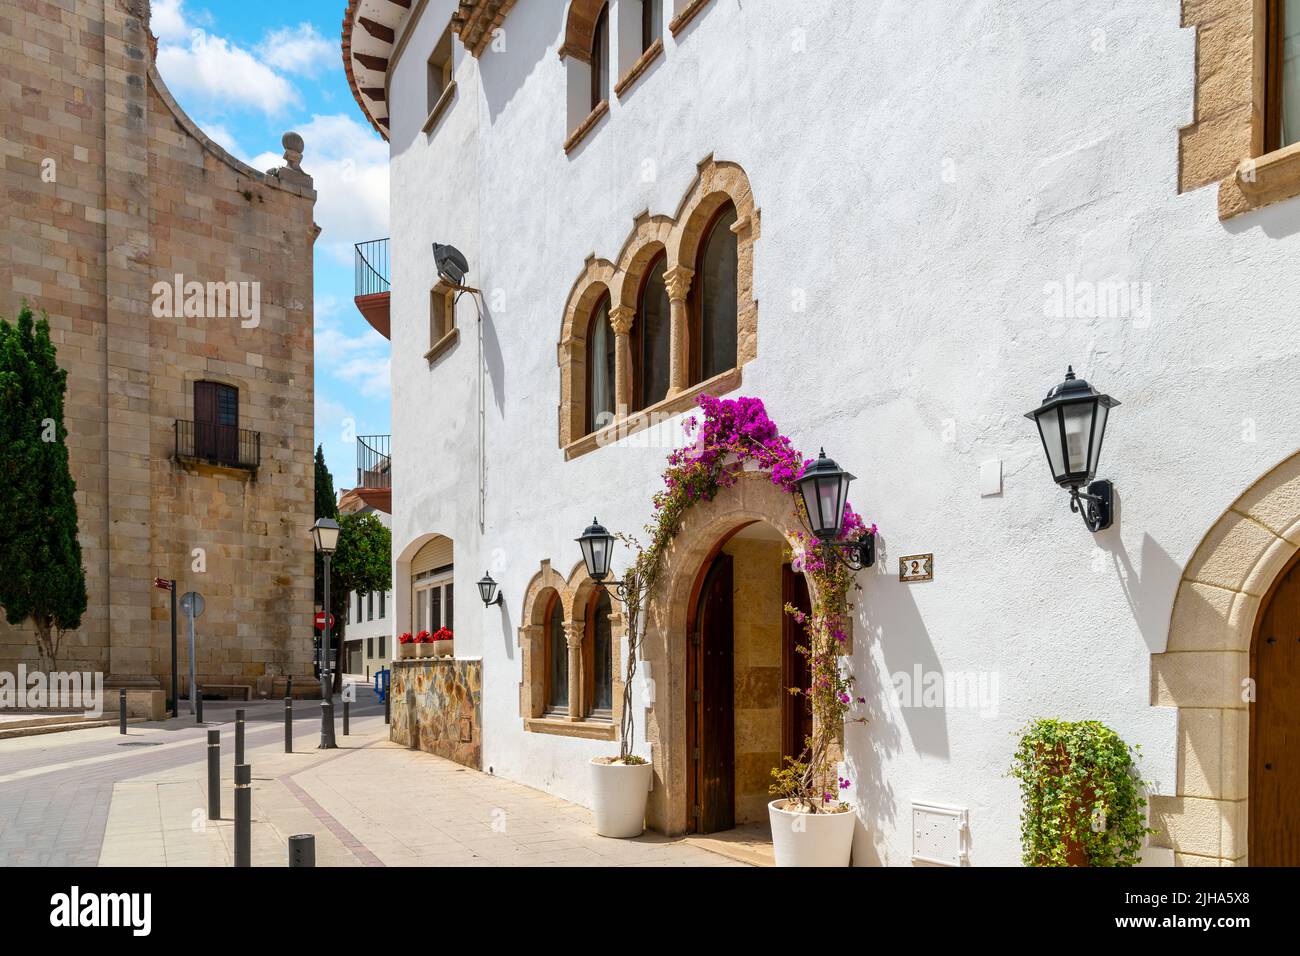 The picturesque streets and alleys in the Costa Brava seaside town of Tossa de Mar, Spain, along the Mediterranean Sea. Stock Photo